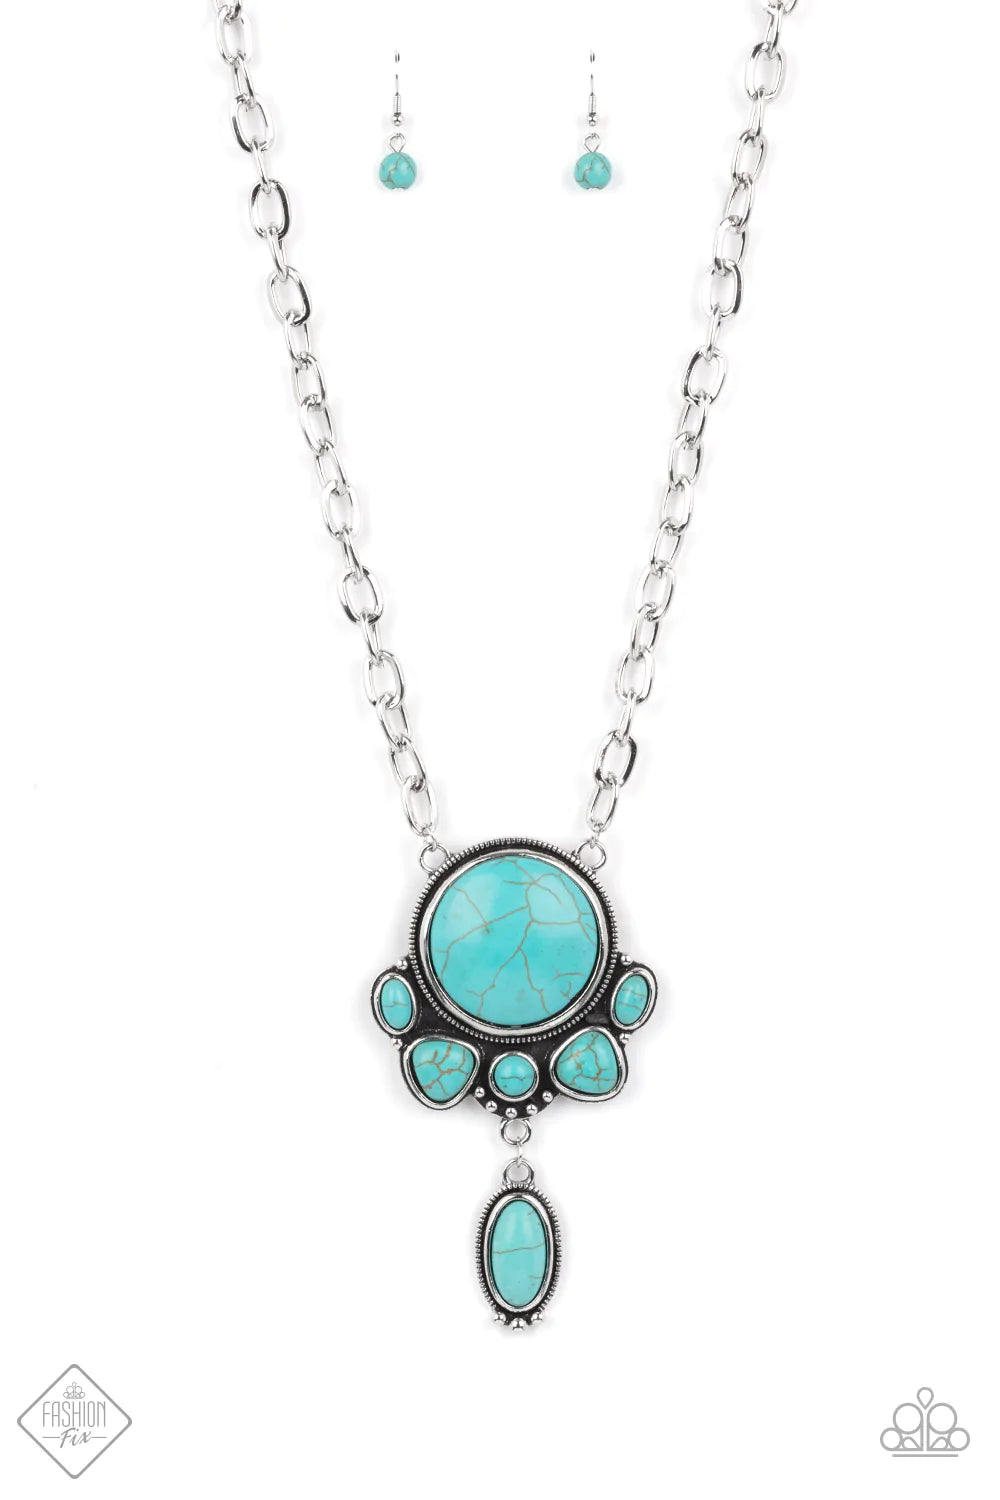 Geographically Gorgeous - Blue (Turquoise) Necklace (SSF-0321)